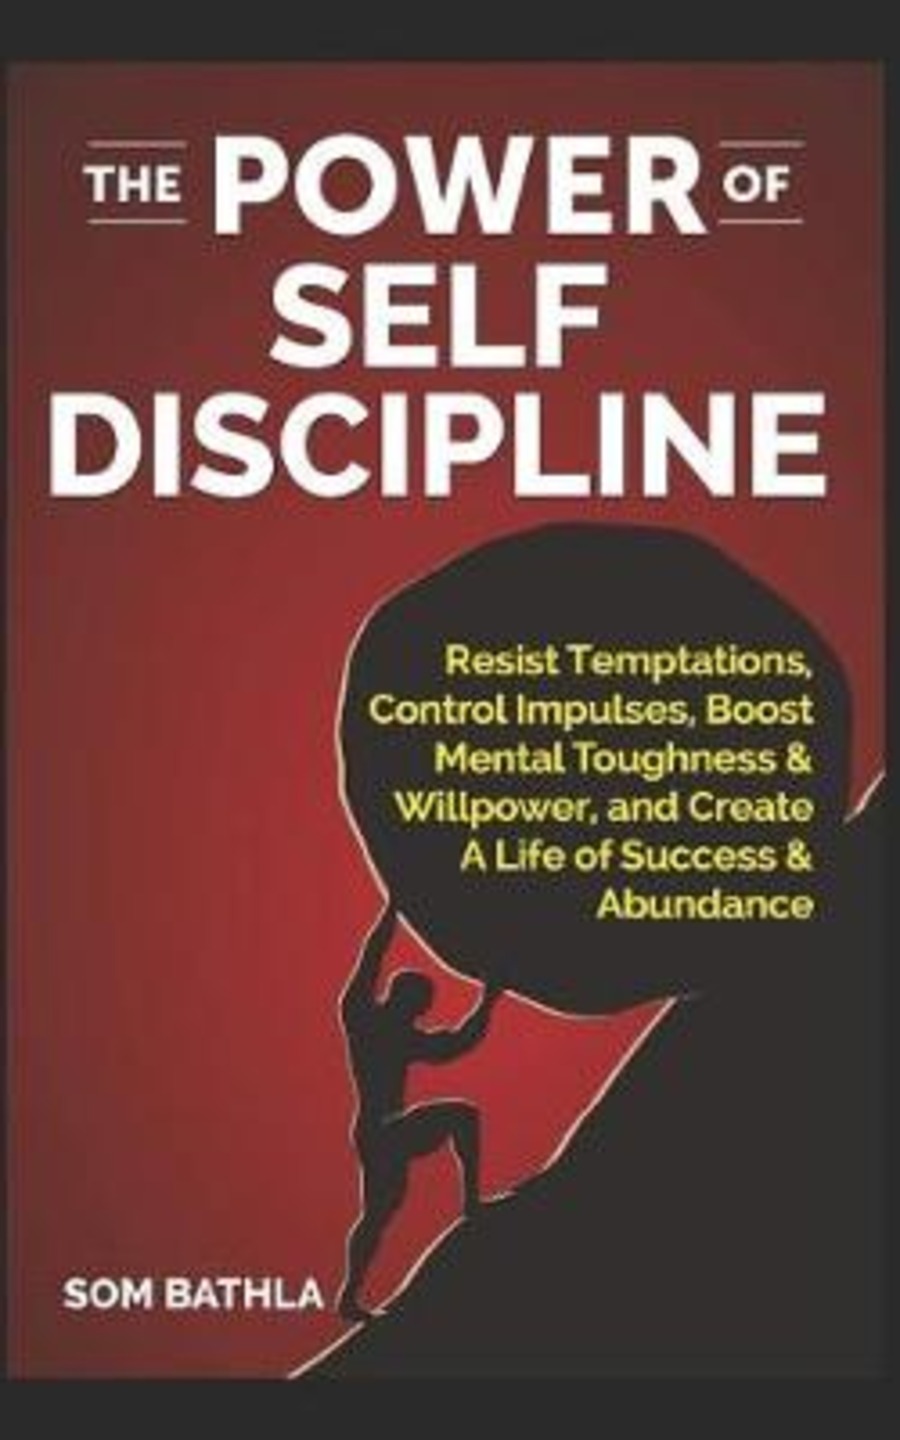 The power of self discipline. Resist temptations, control impulses, boost mental toughness & willpower, and create a life of success & abundance